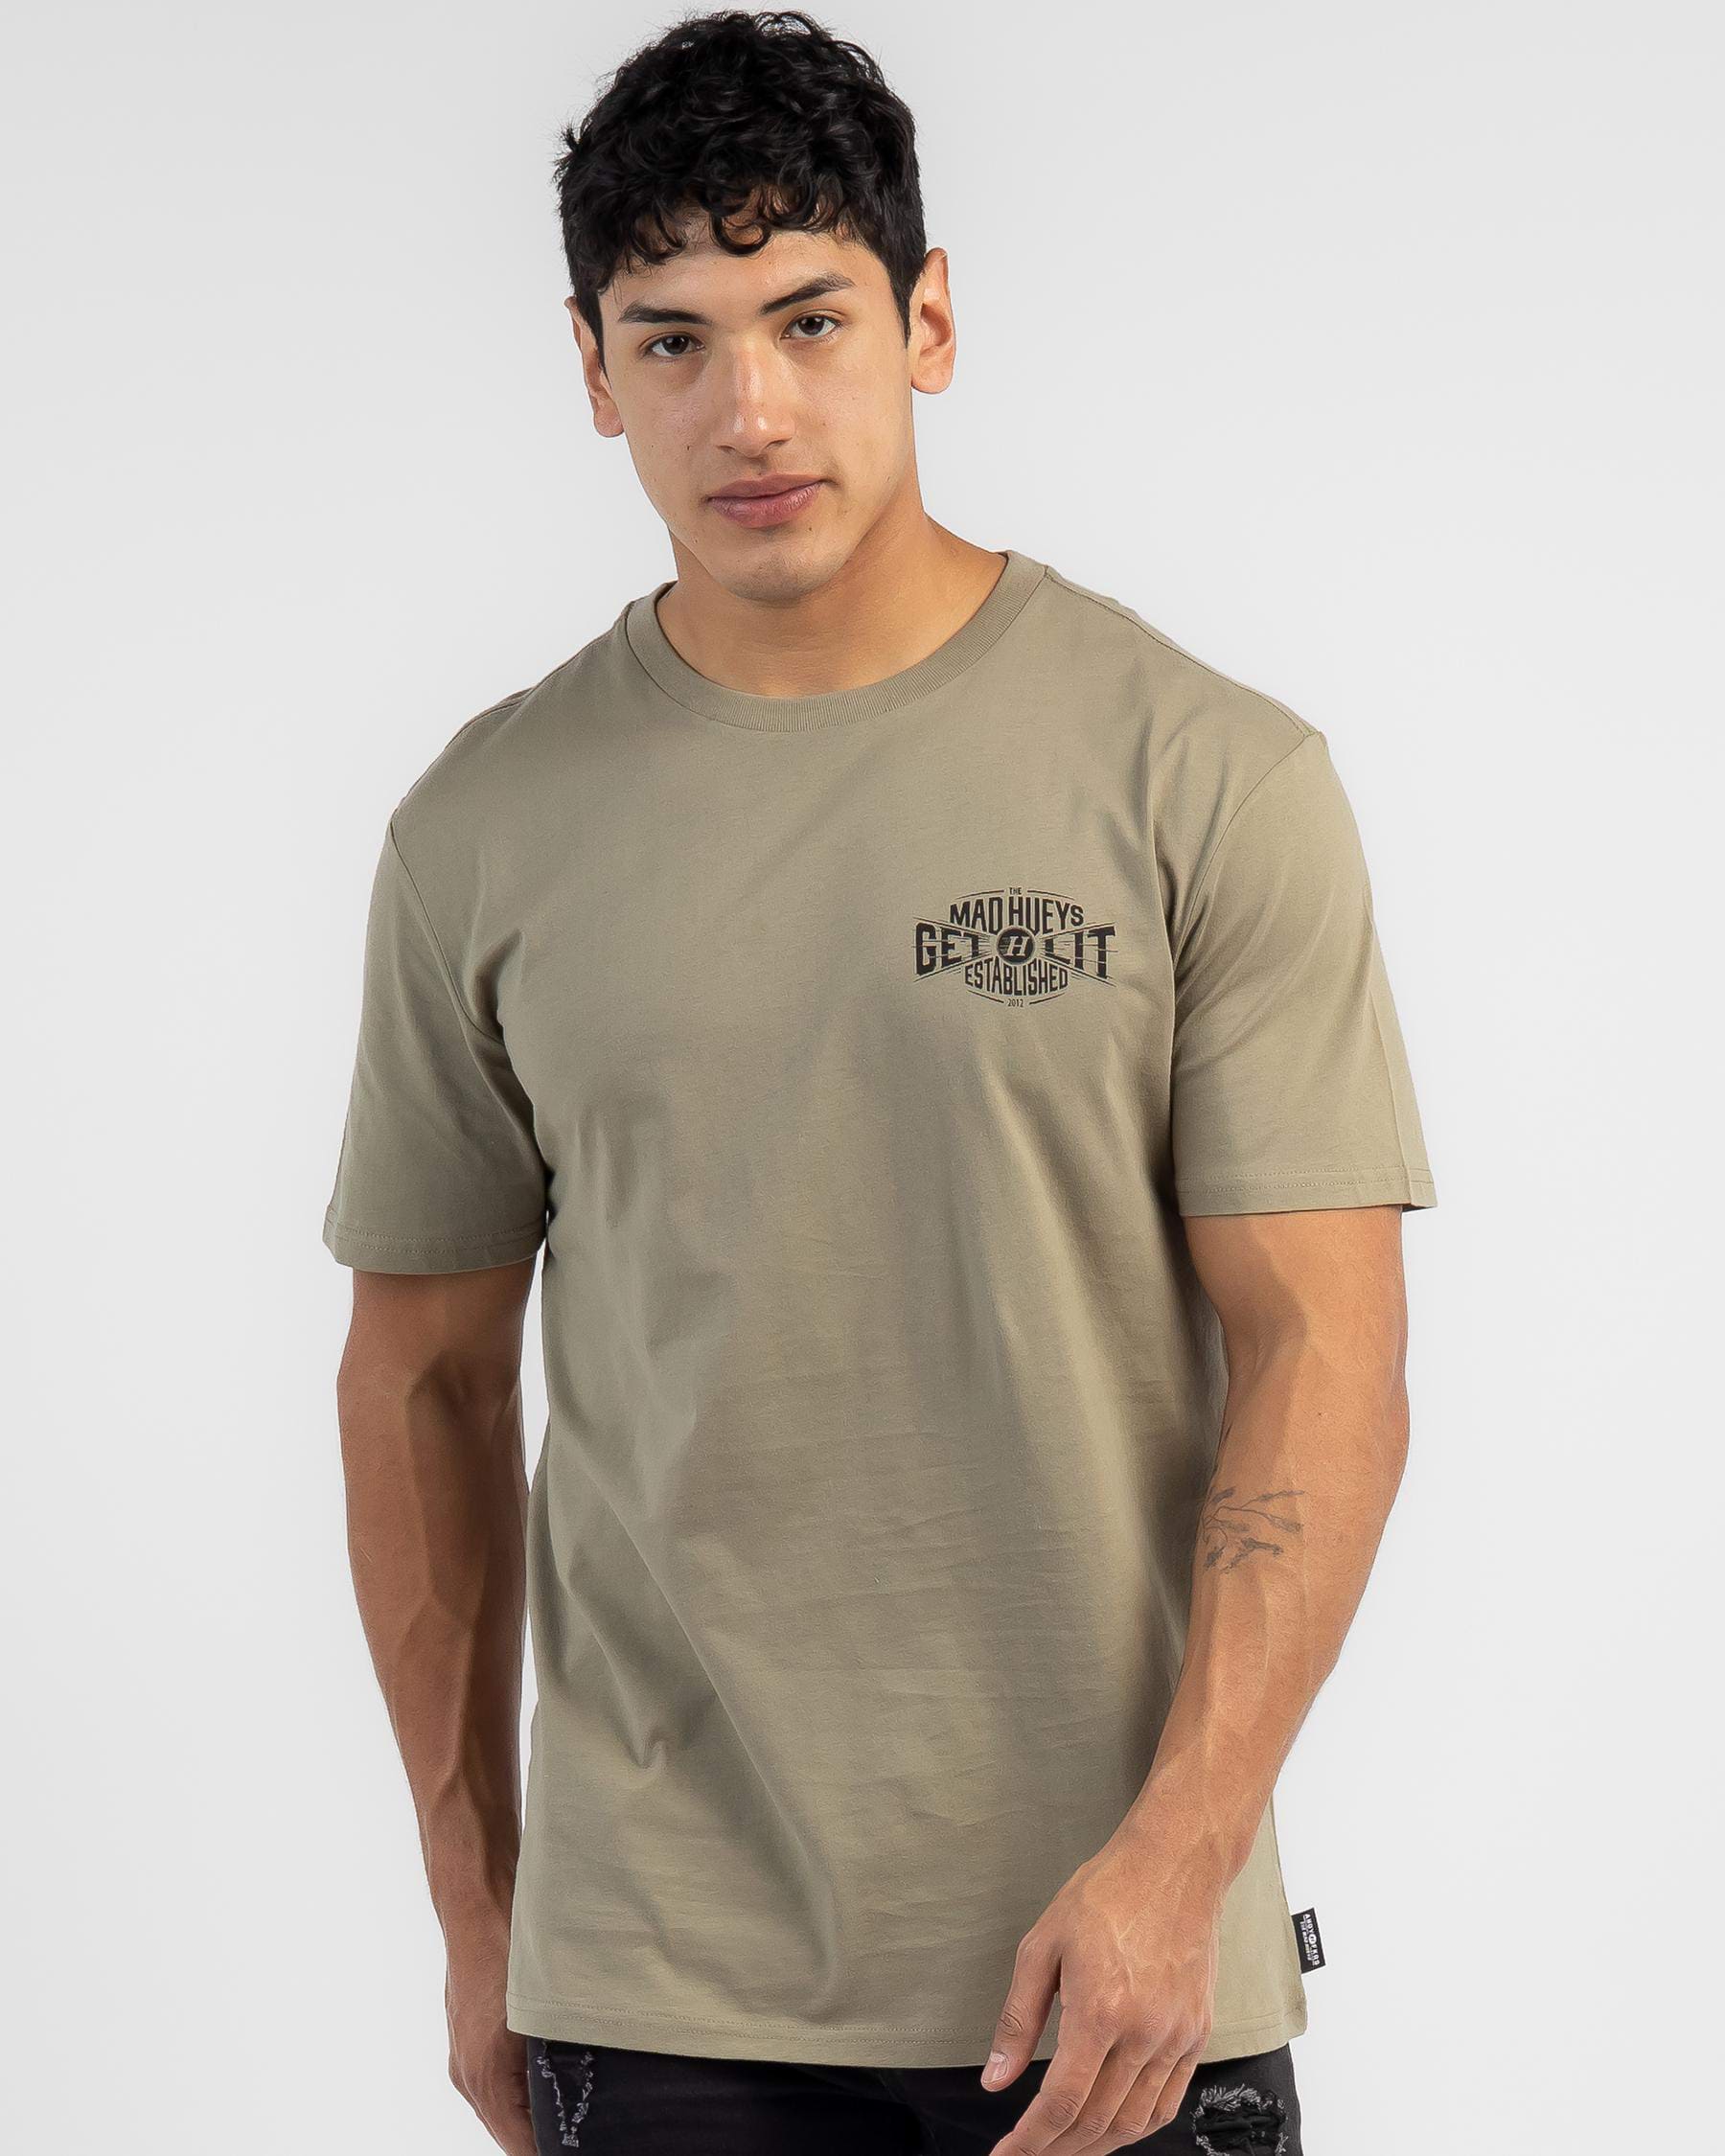 Shop The Mad Hueys Get Lit T-Shirt In Khaki - Fast Shipping & Easy ...